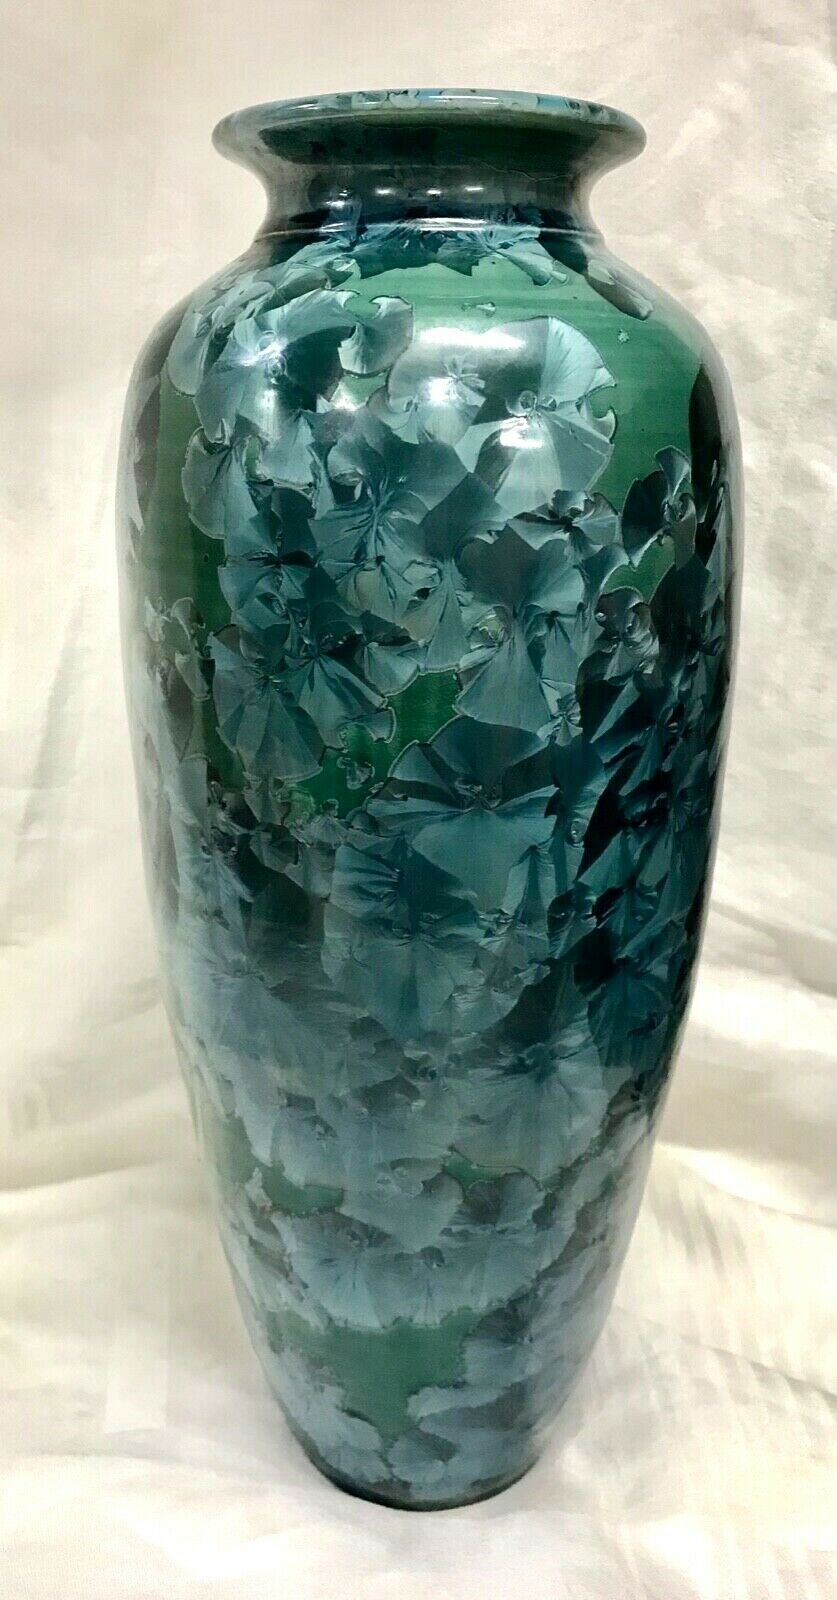 Phil Morgan Seagrove Nc 2004 Signed & Dated 15" Crystalline Vase Blues/ Greens